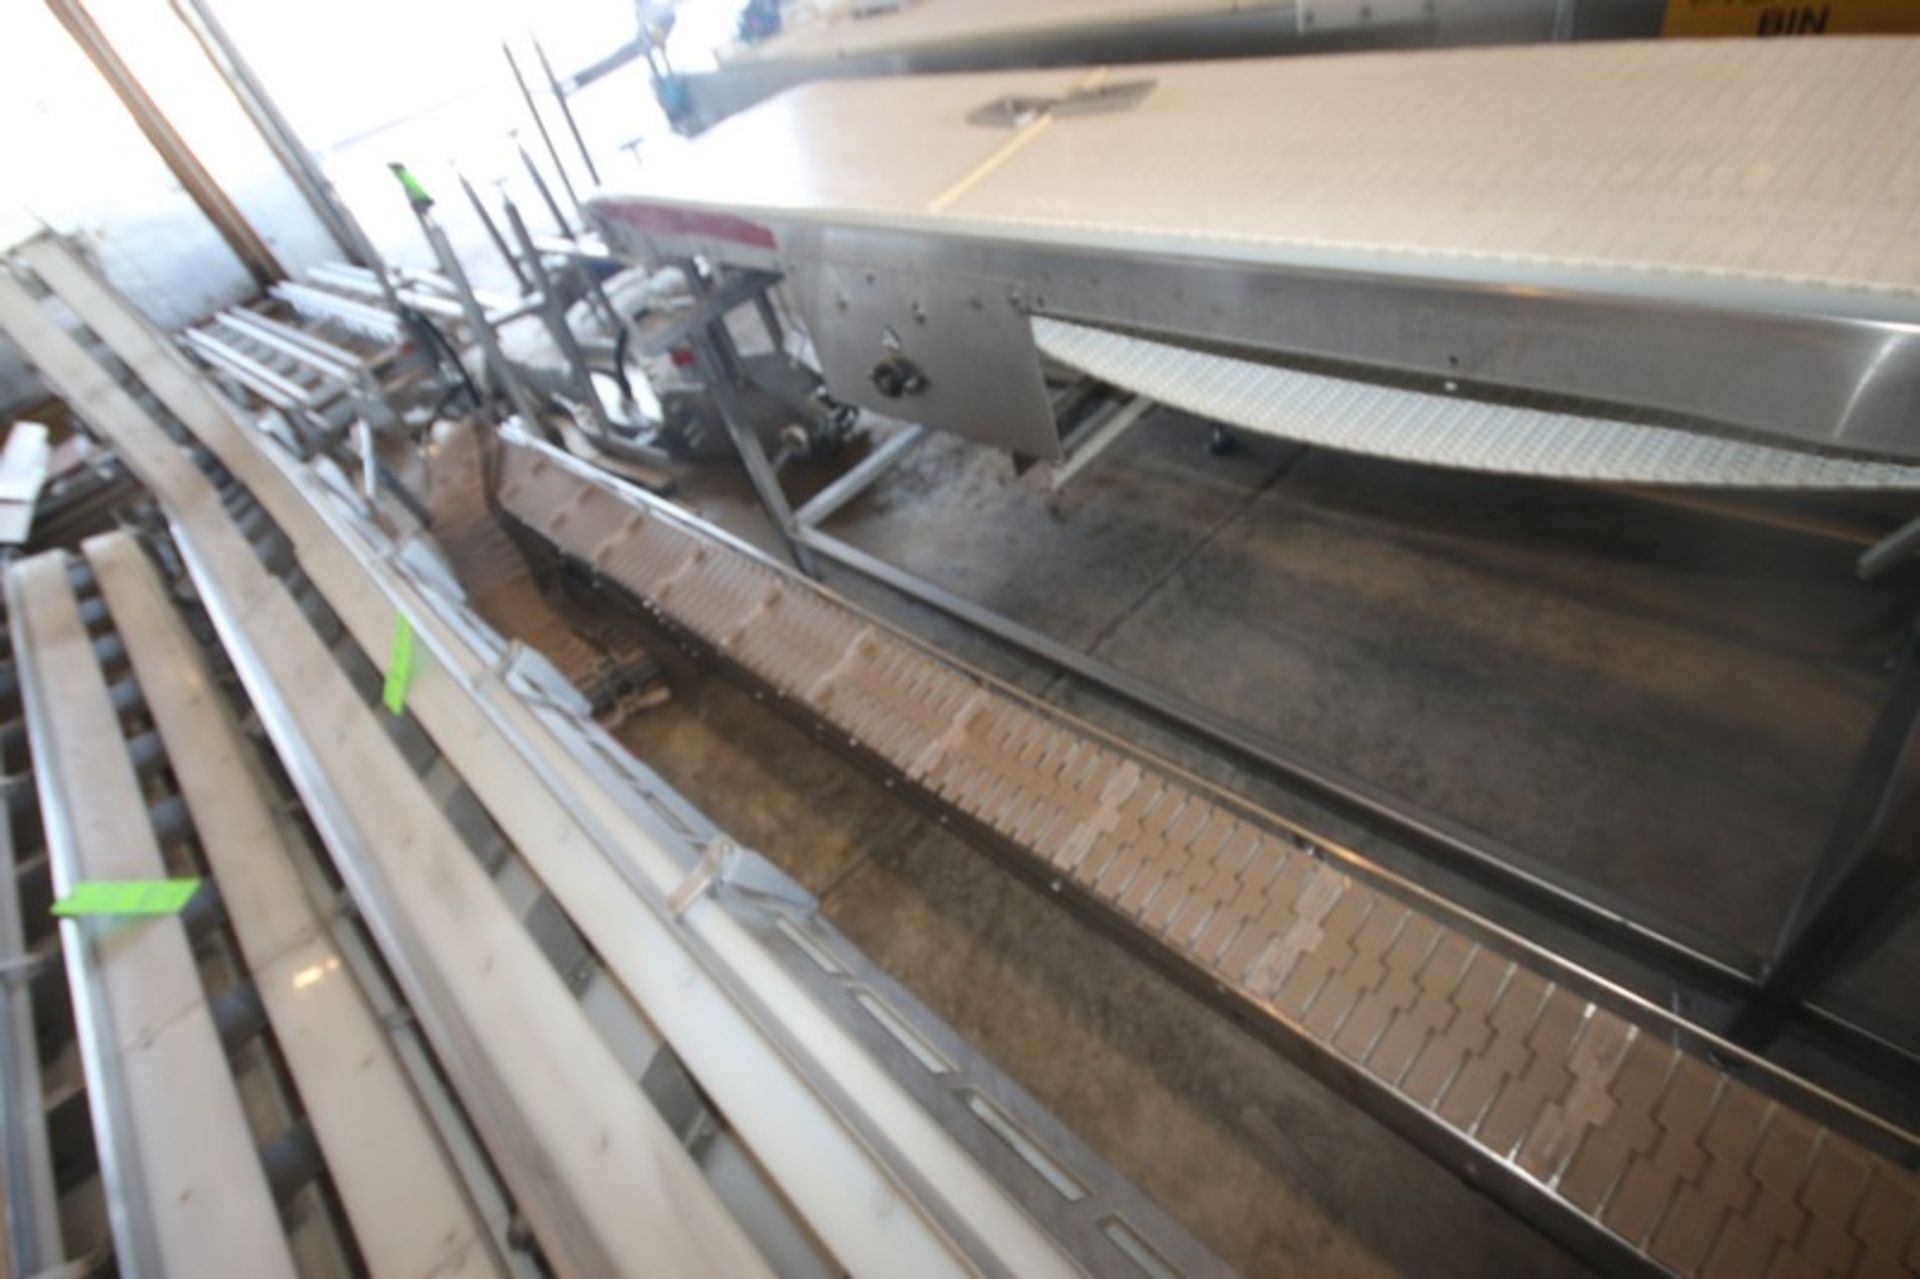 Straight Section of Flighted S/S Conveyor, with Flights, Aprox. 12" W Flights, Overall Length Aprox. - Image 3 of 3